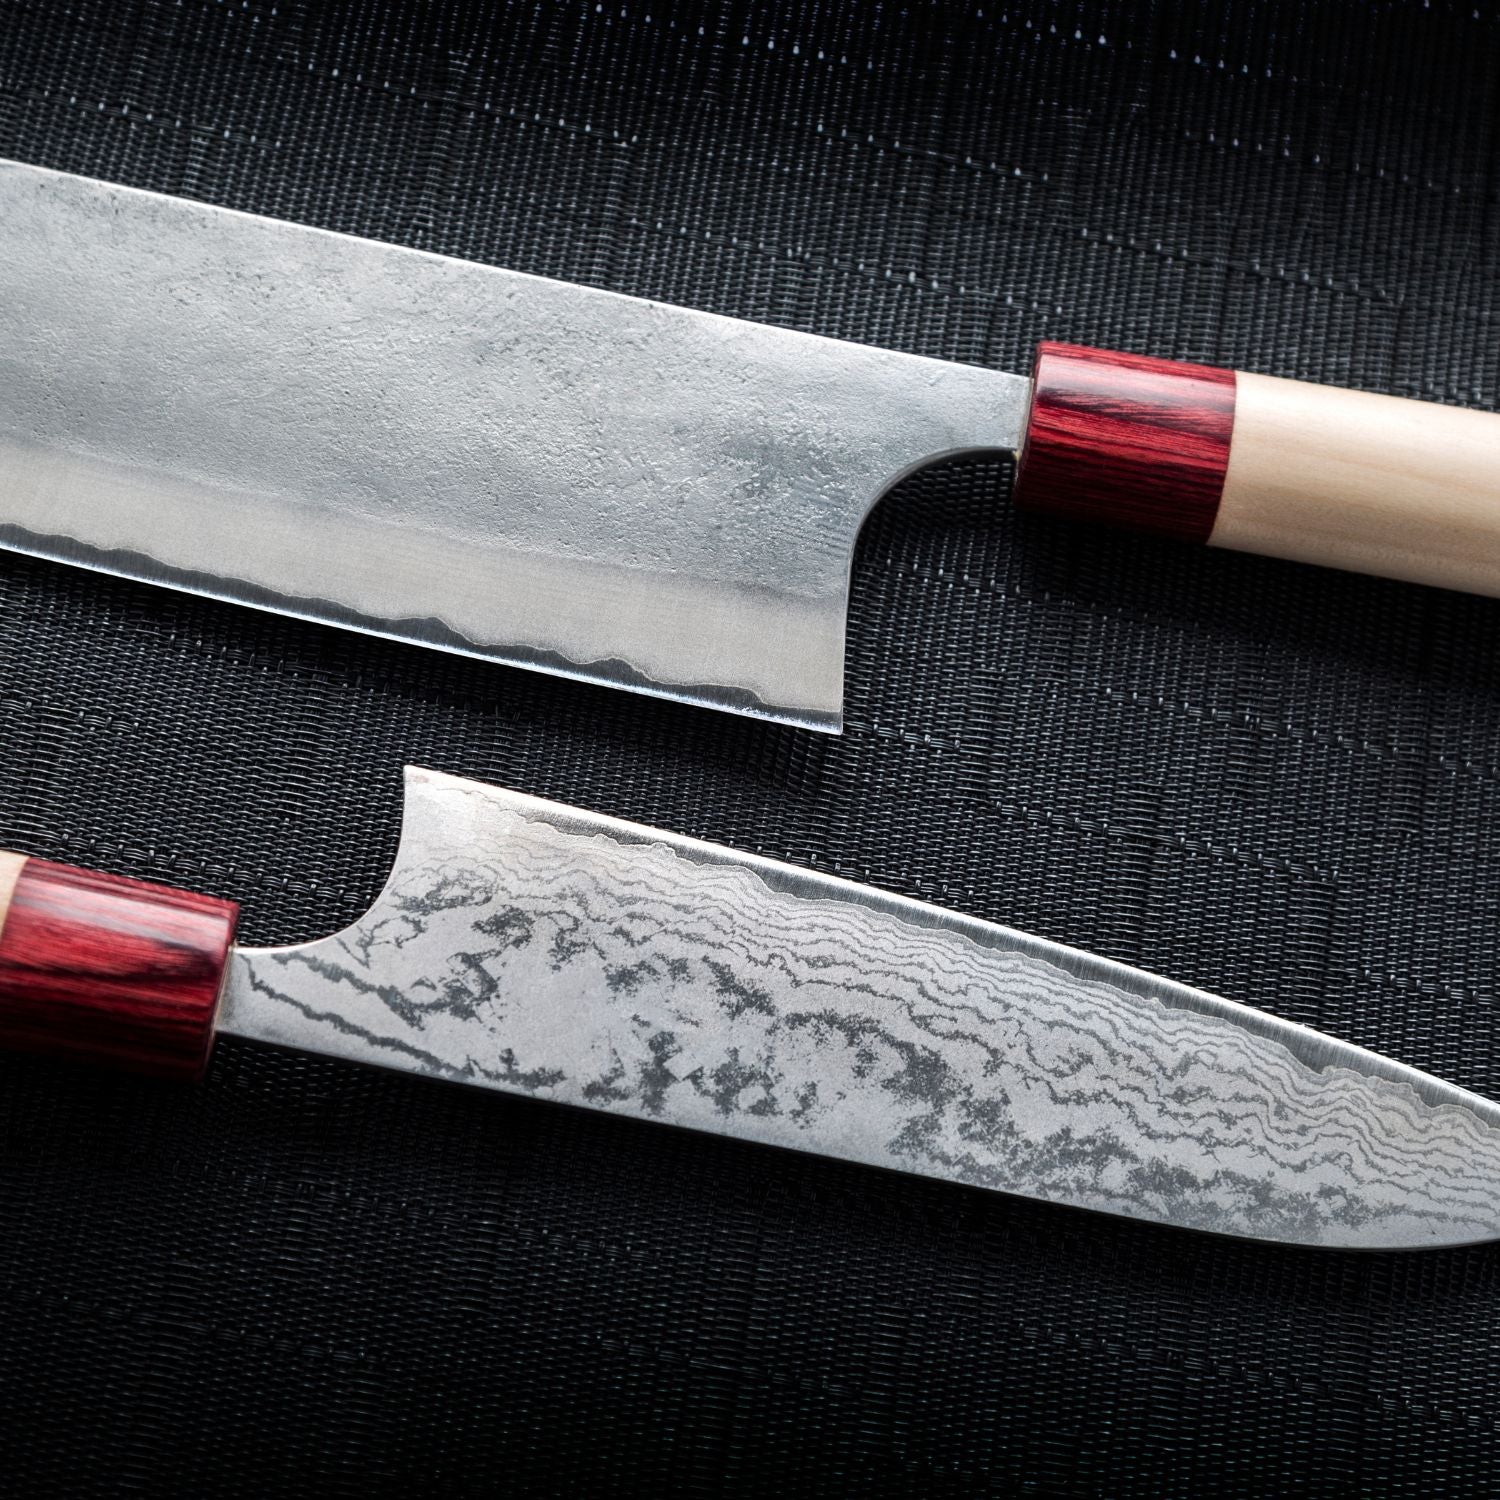 Santoku vs Chef knife - Which one is better Chef knife or Santoku? (western  style chef knife*) 